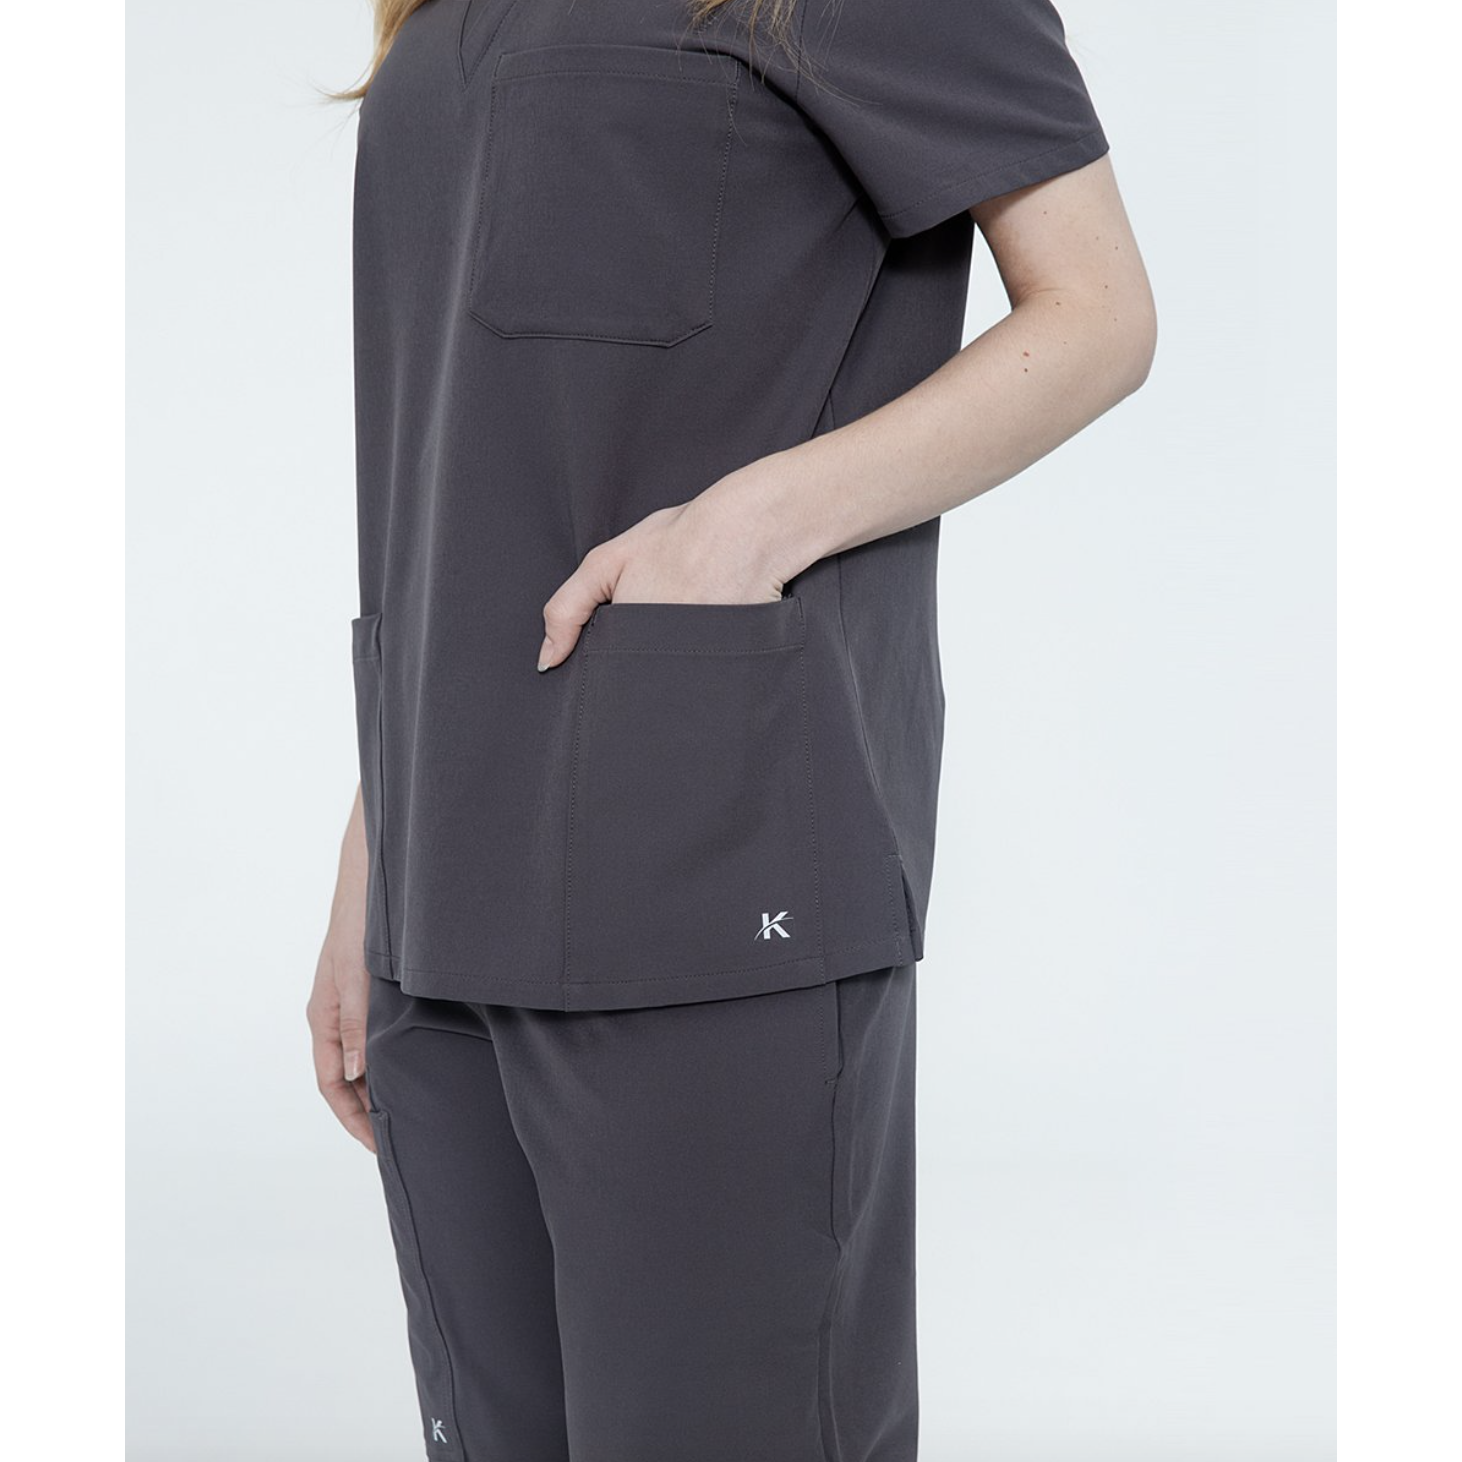 BUY ANY 3 KALEA AND GET 1 FREE KALEA DEAL* Scrub Top Women's Water Resistant & Four Way Stretch Reverie 3-Pocket  AT2 (SALE)